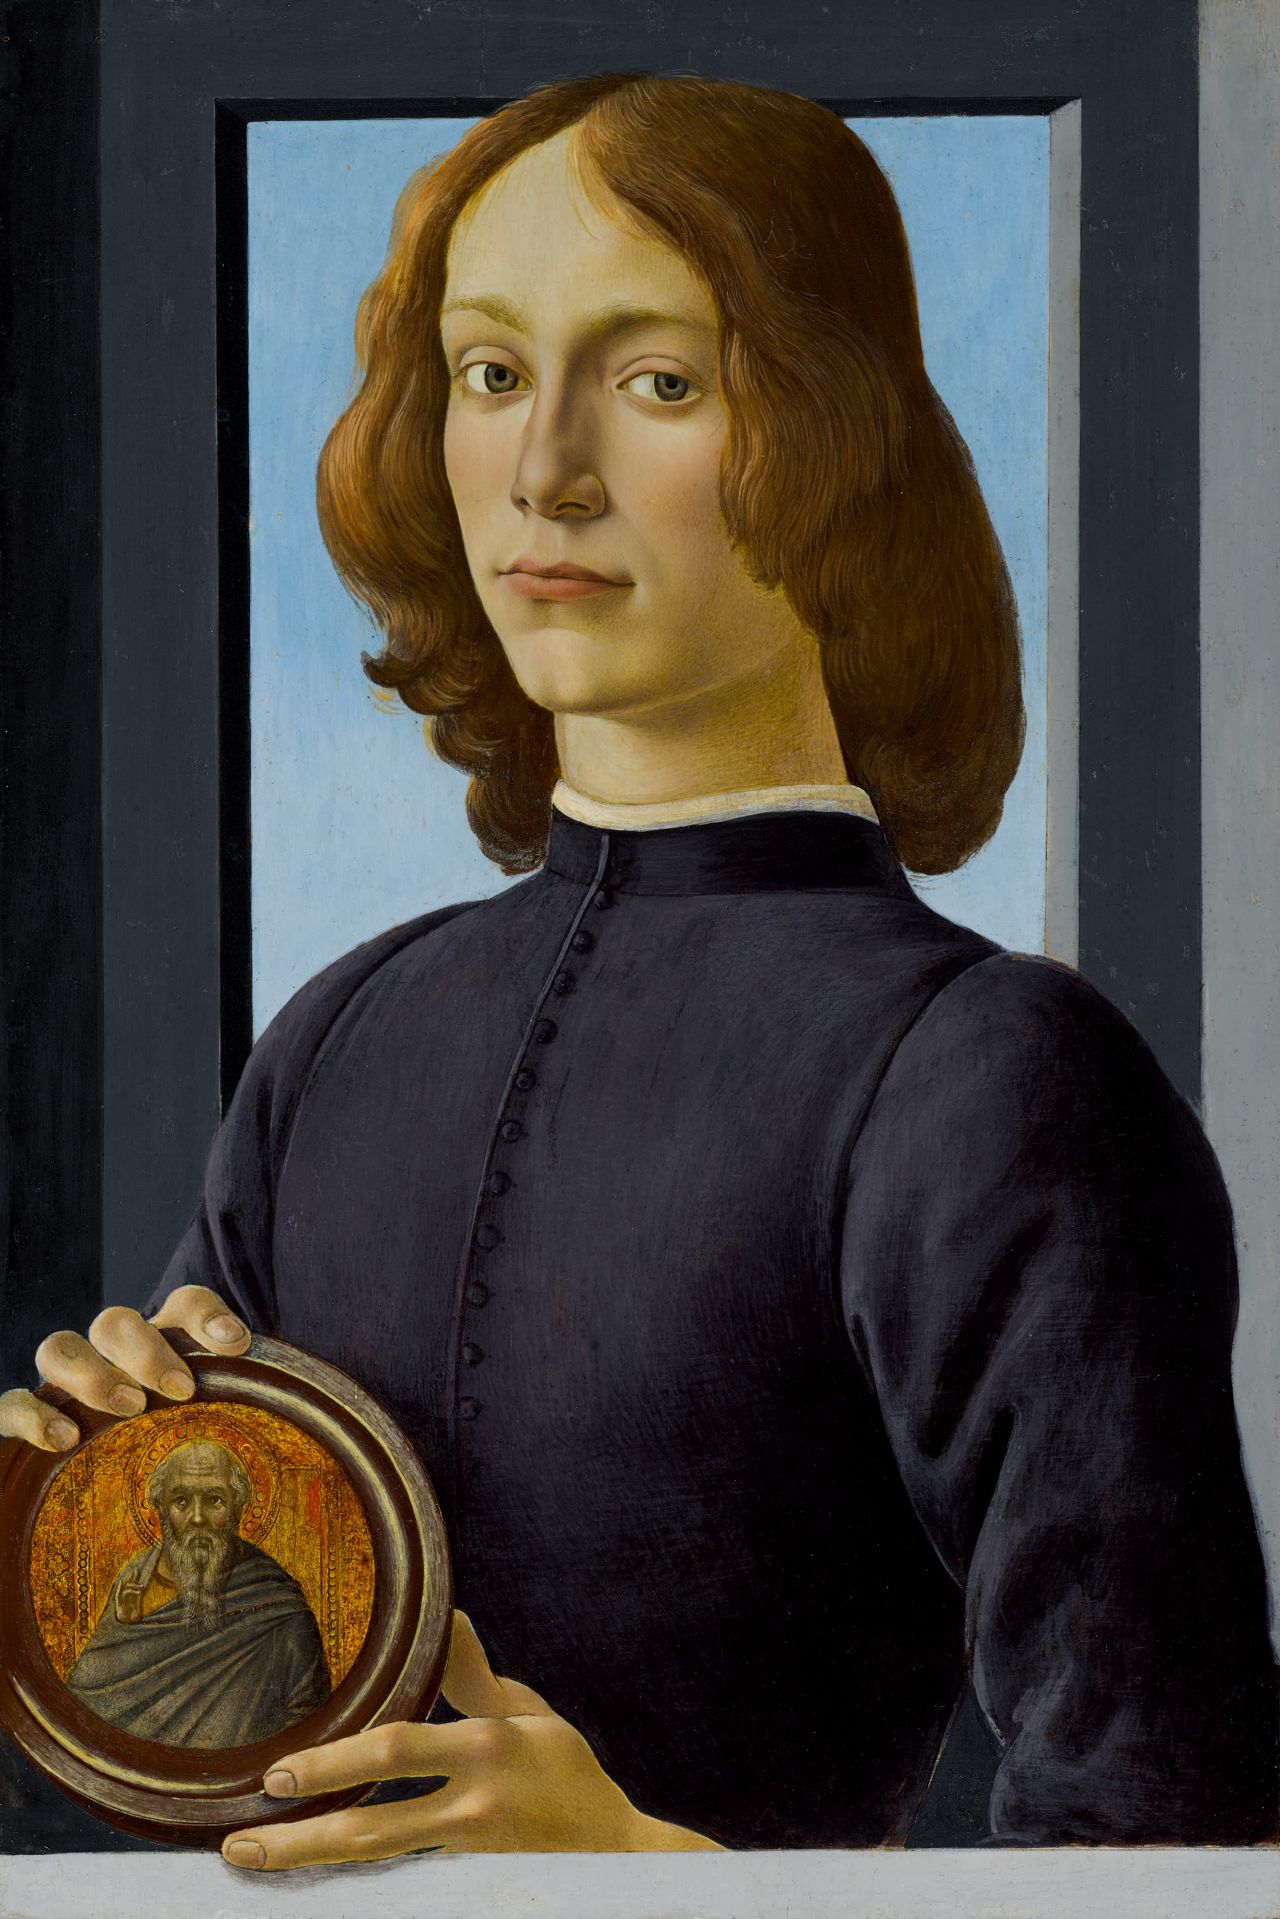 Sandro Botticelli's "Young Man Holding a Roundel" is expected to sell for over $80 million when it goes to auction in January 2021.